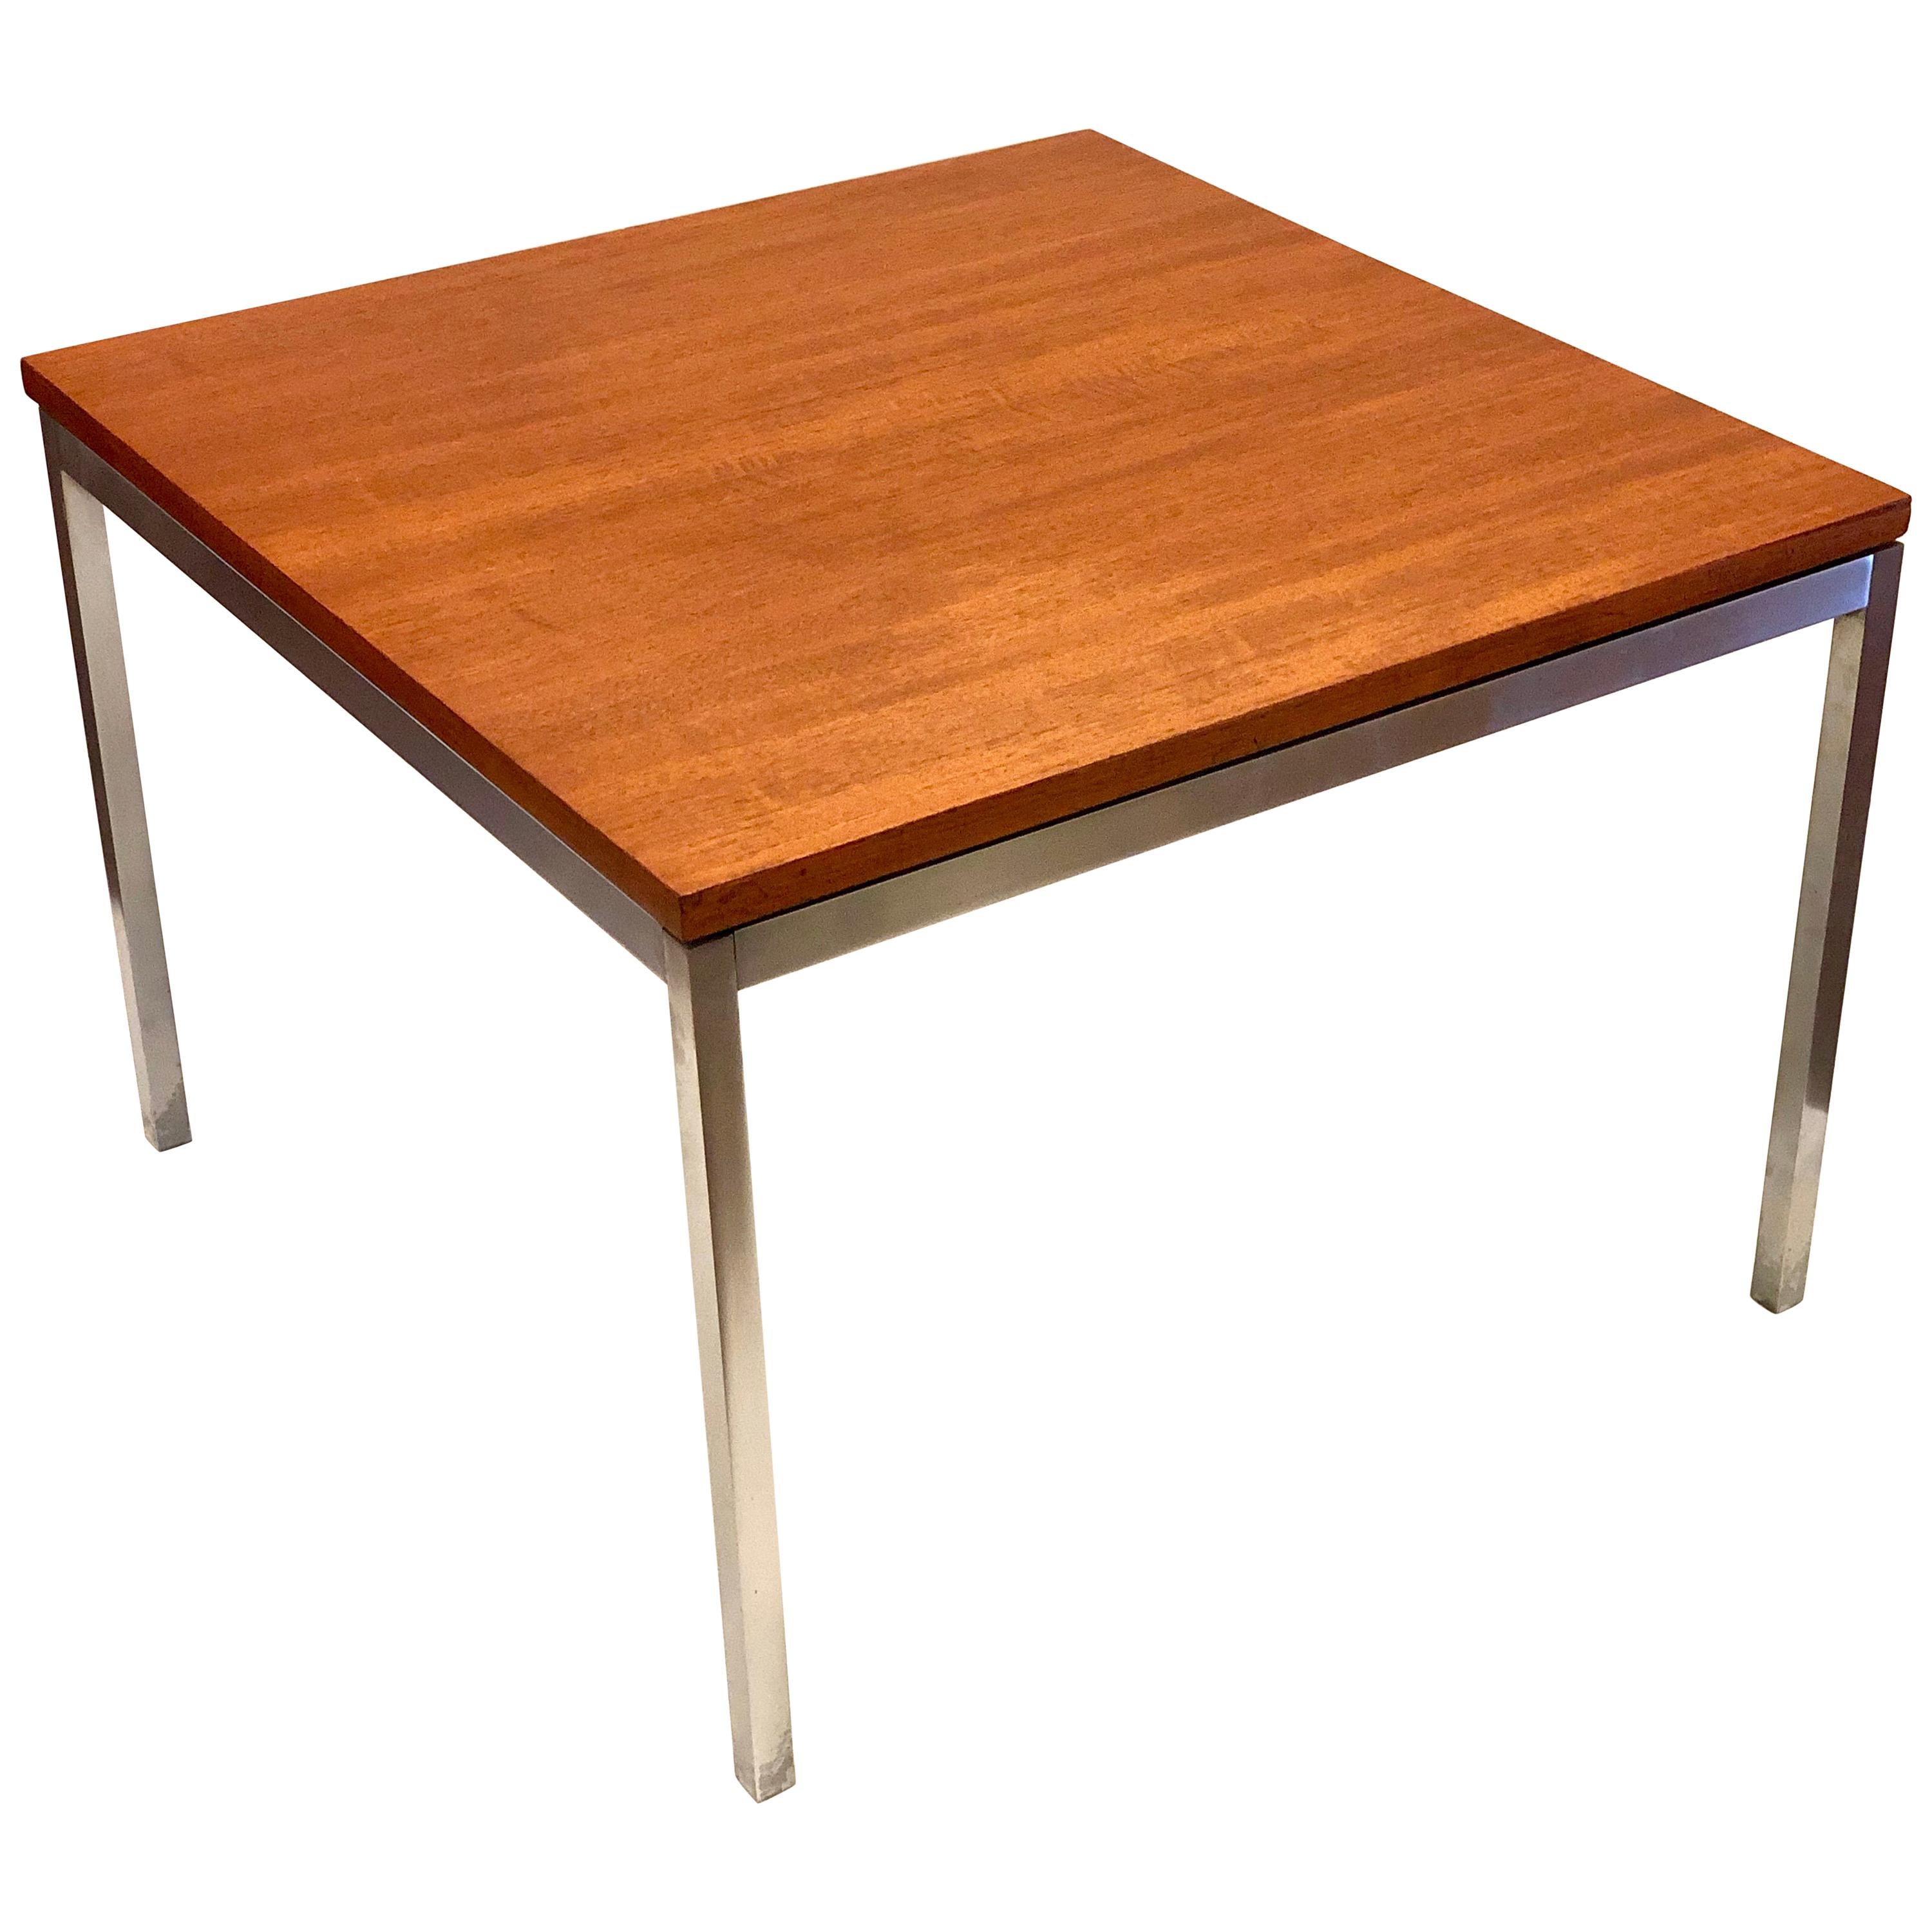 American Midcentury Small Square Teak Coffee Table by Knoll